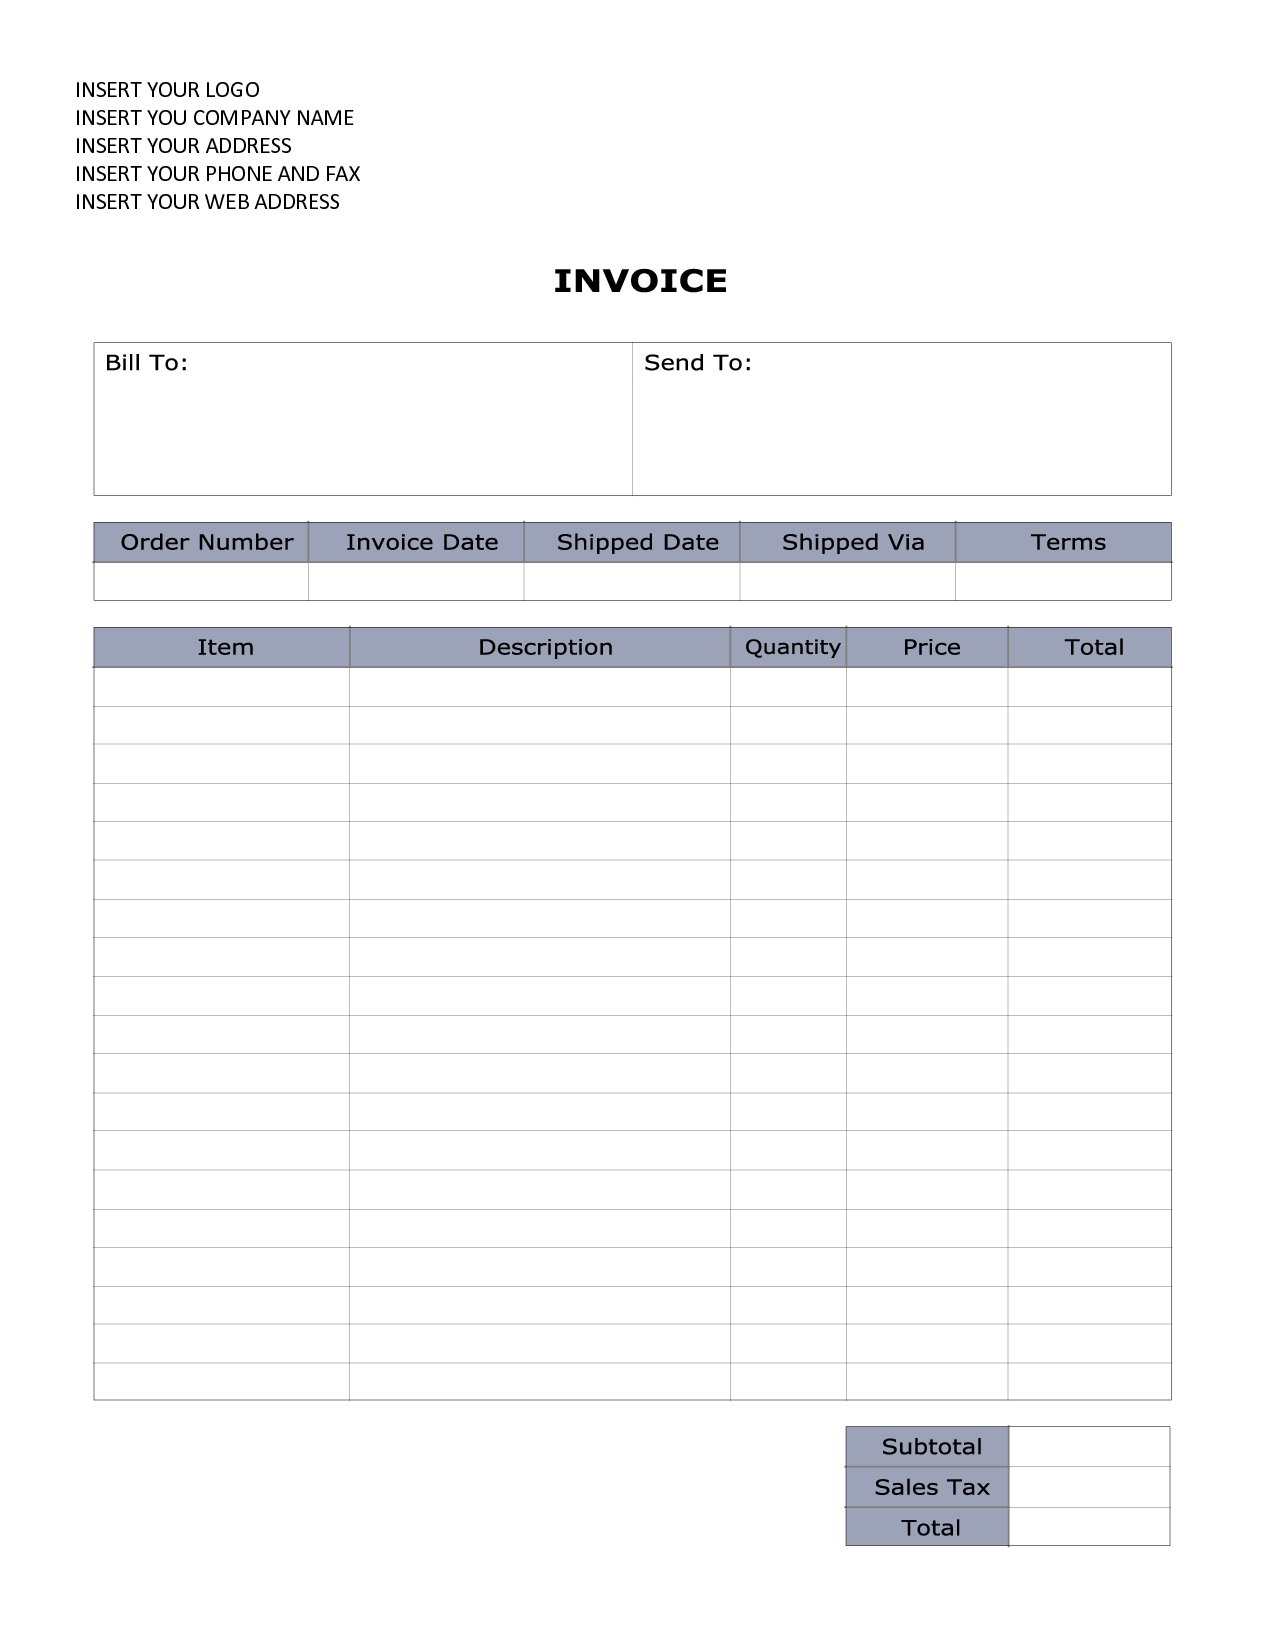 16 Blank Invoice Format For Manufacturer With Stunning Design by Invoice Format For Manufacturer